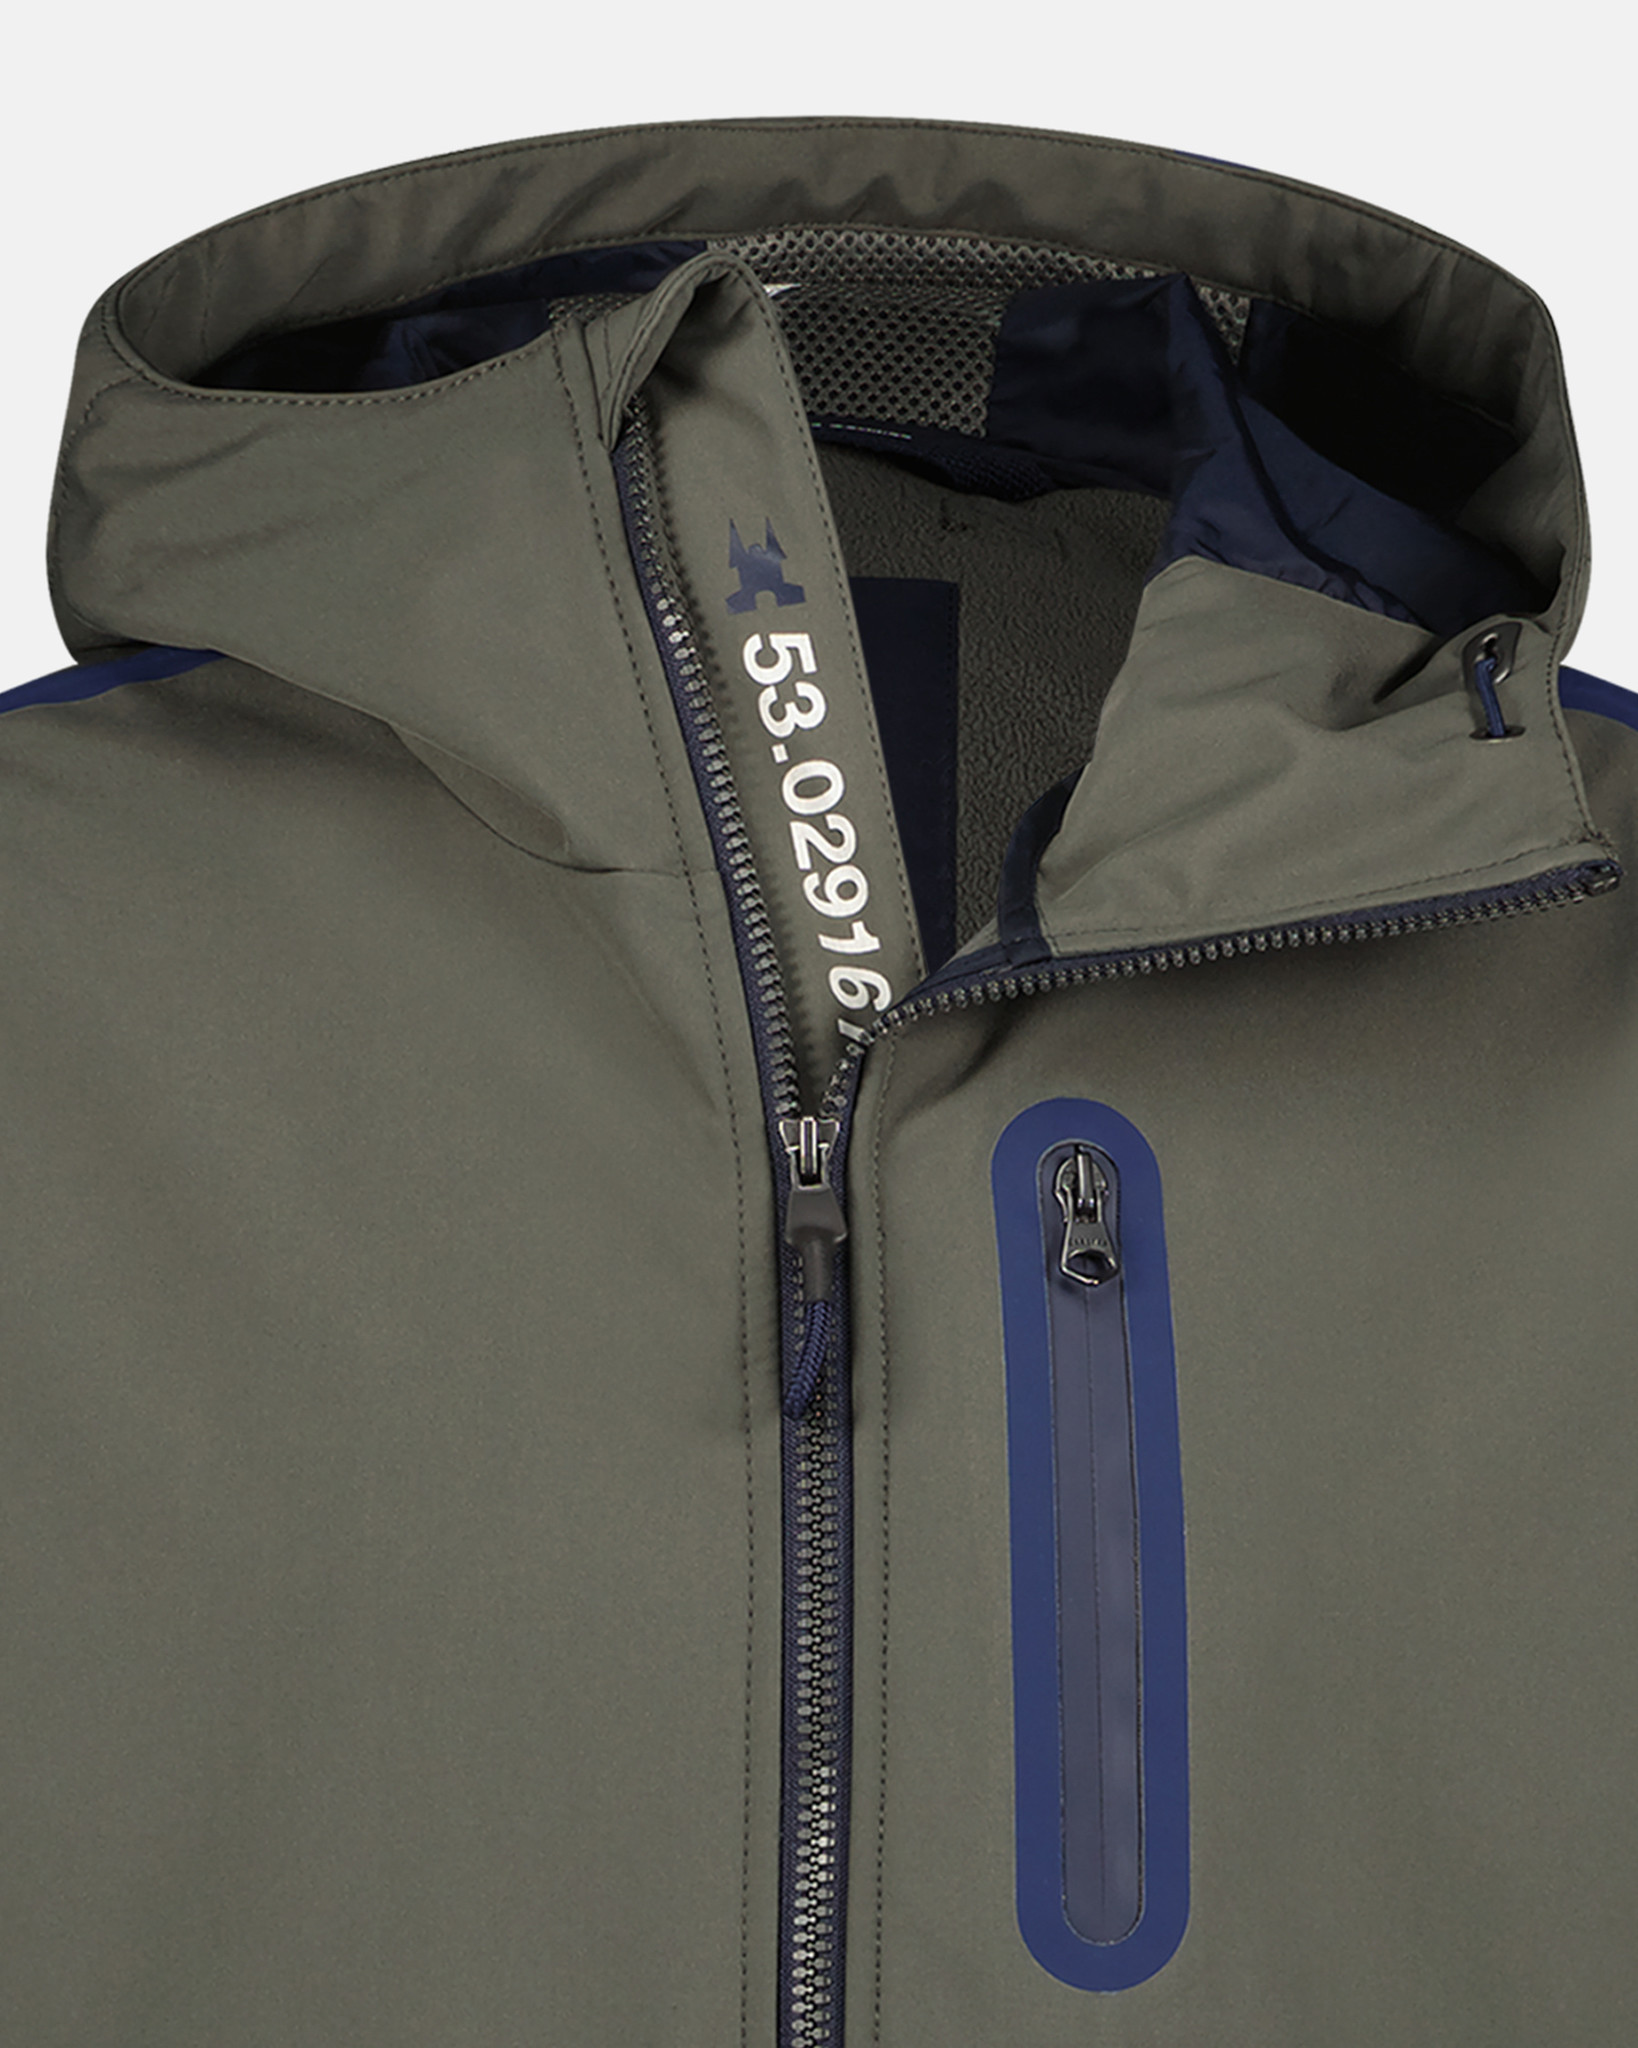 The PRG™ 3-Layer Volcano Jacket